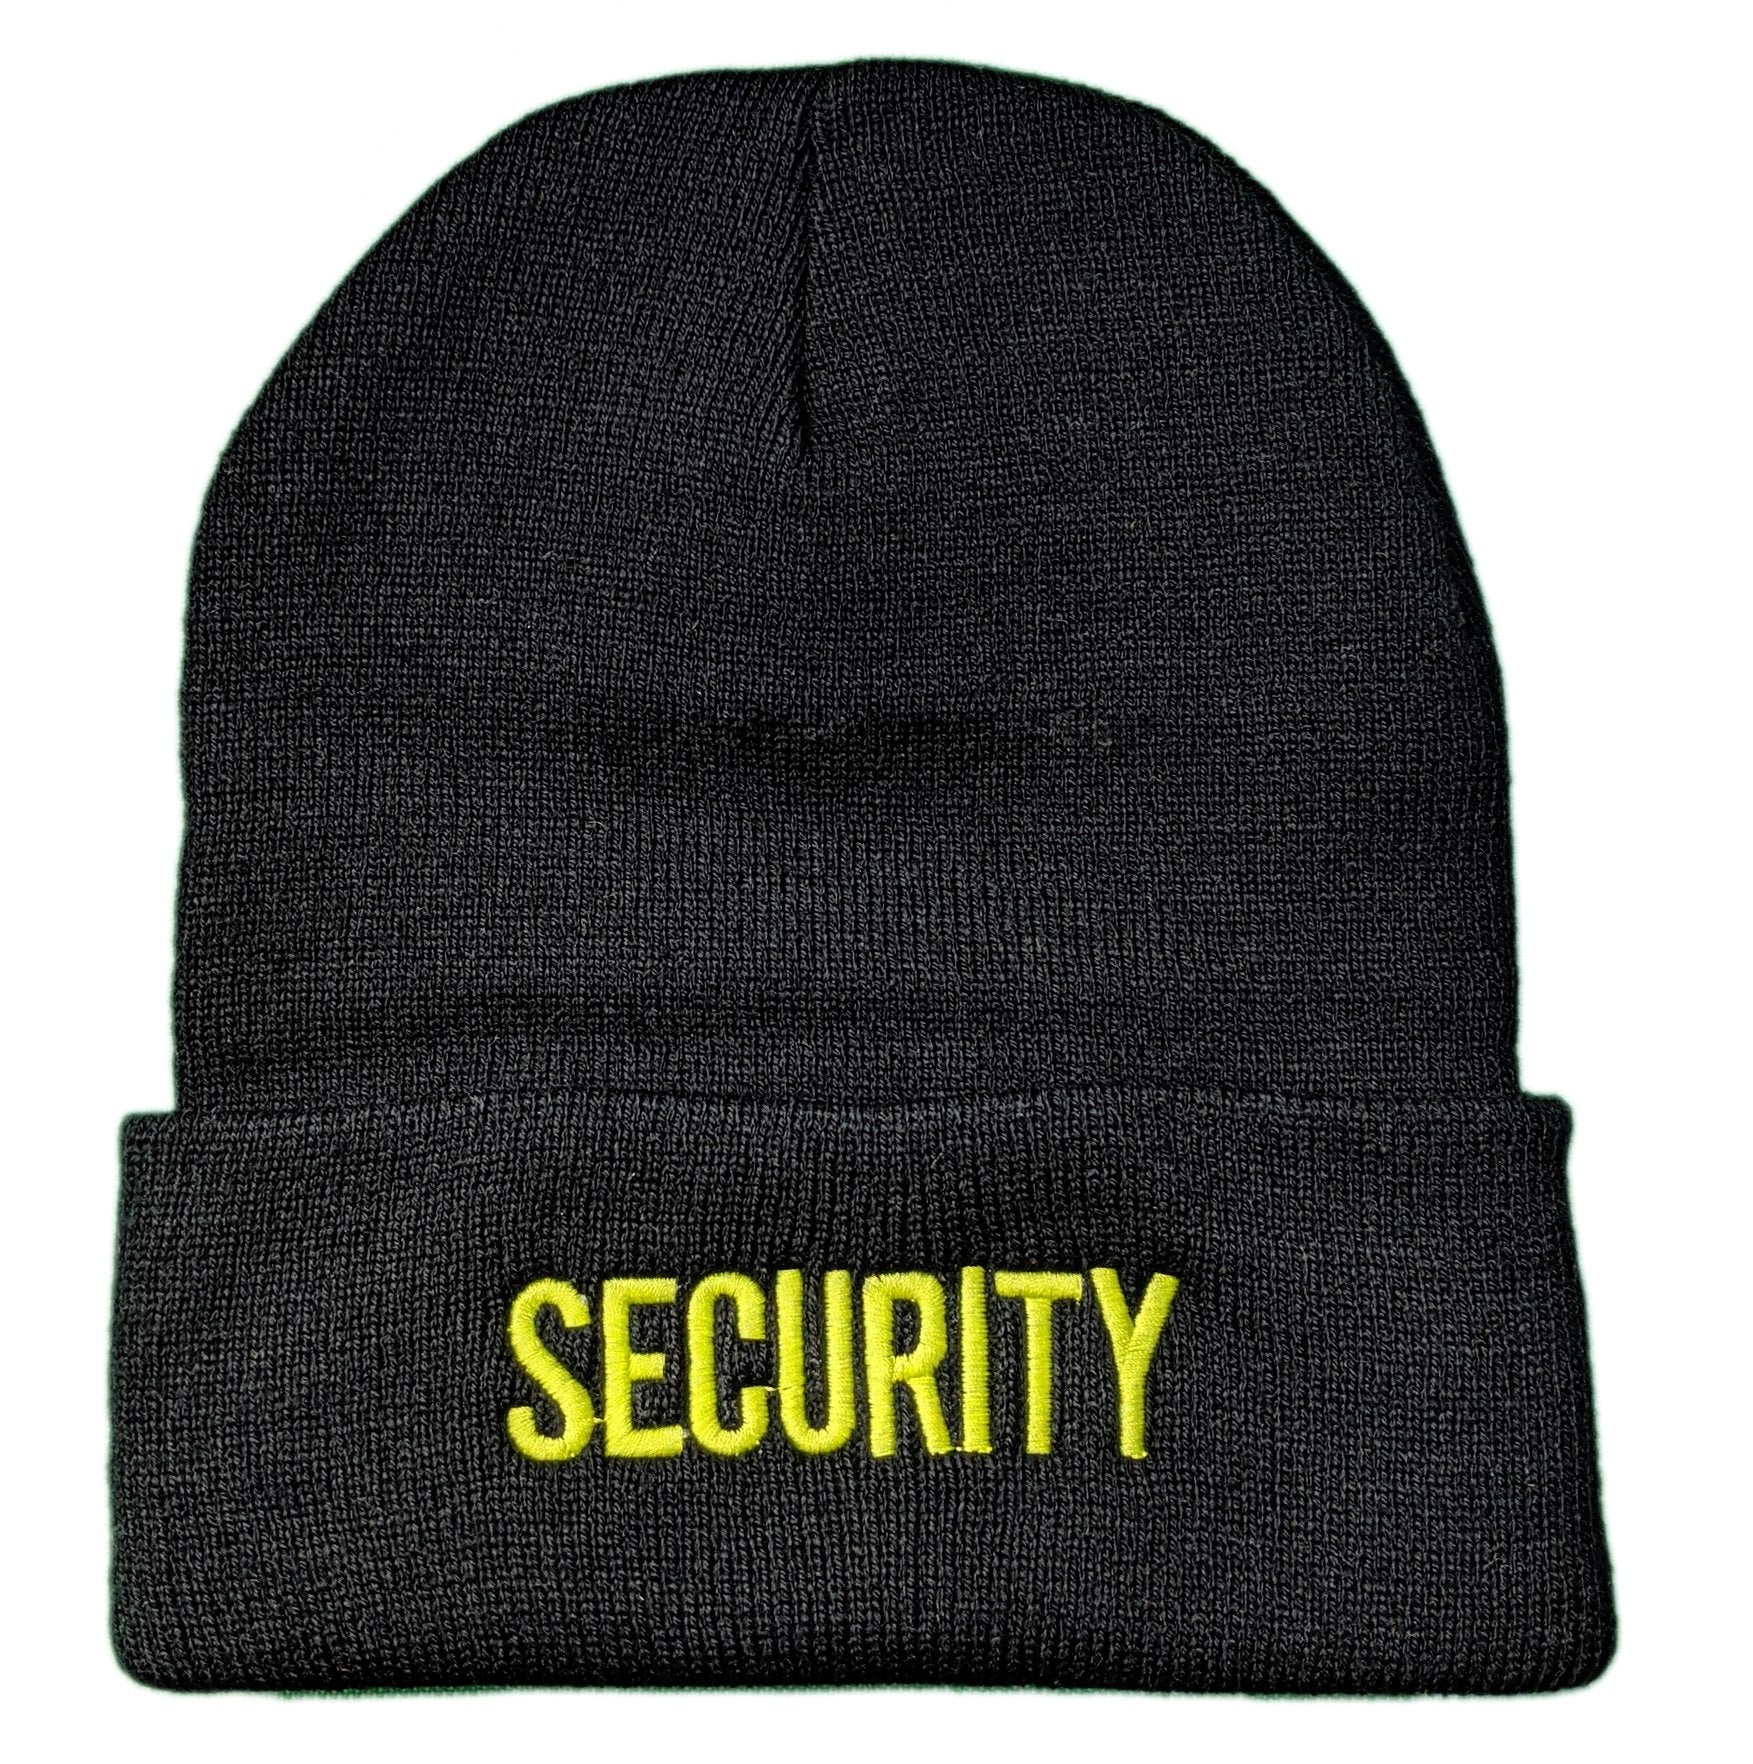 Men's Security Knit Cap Beanie USA Embroidered Winter Hat (Black/Neon)